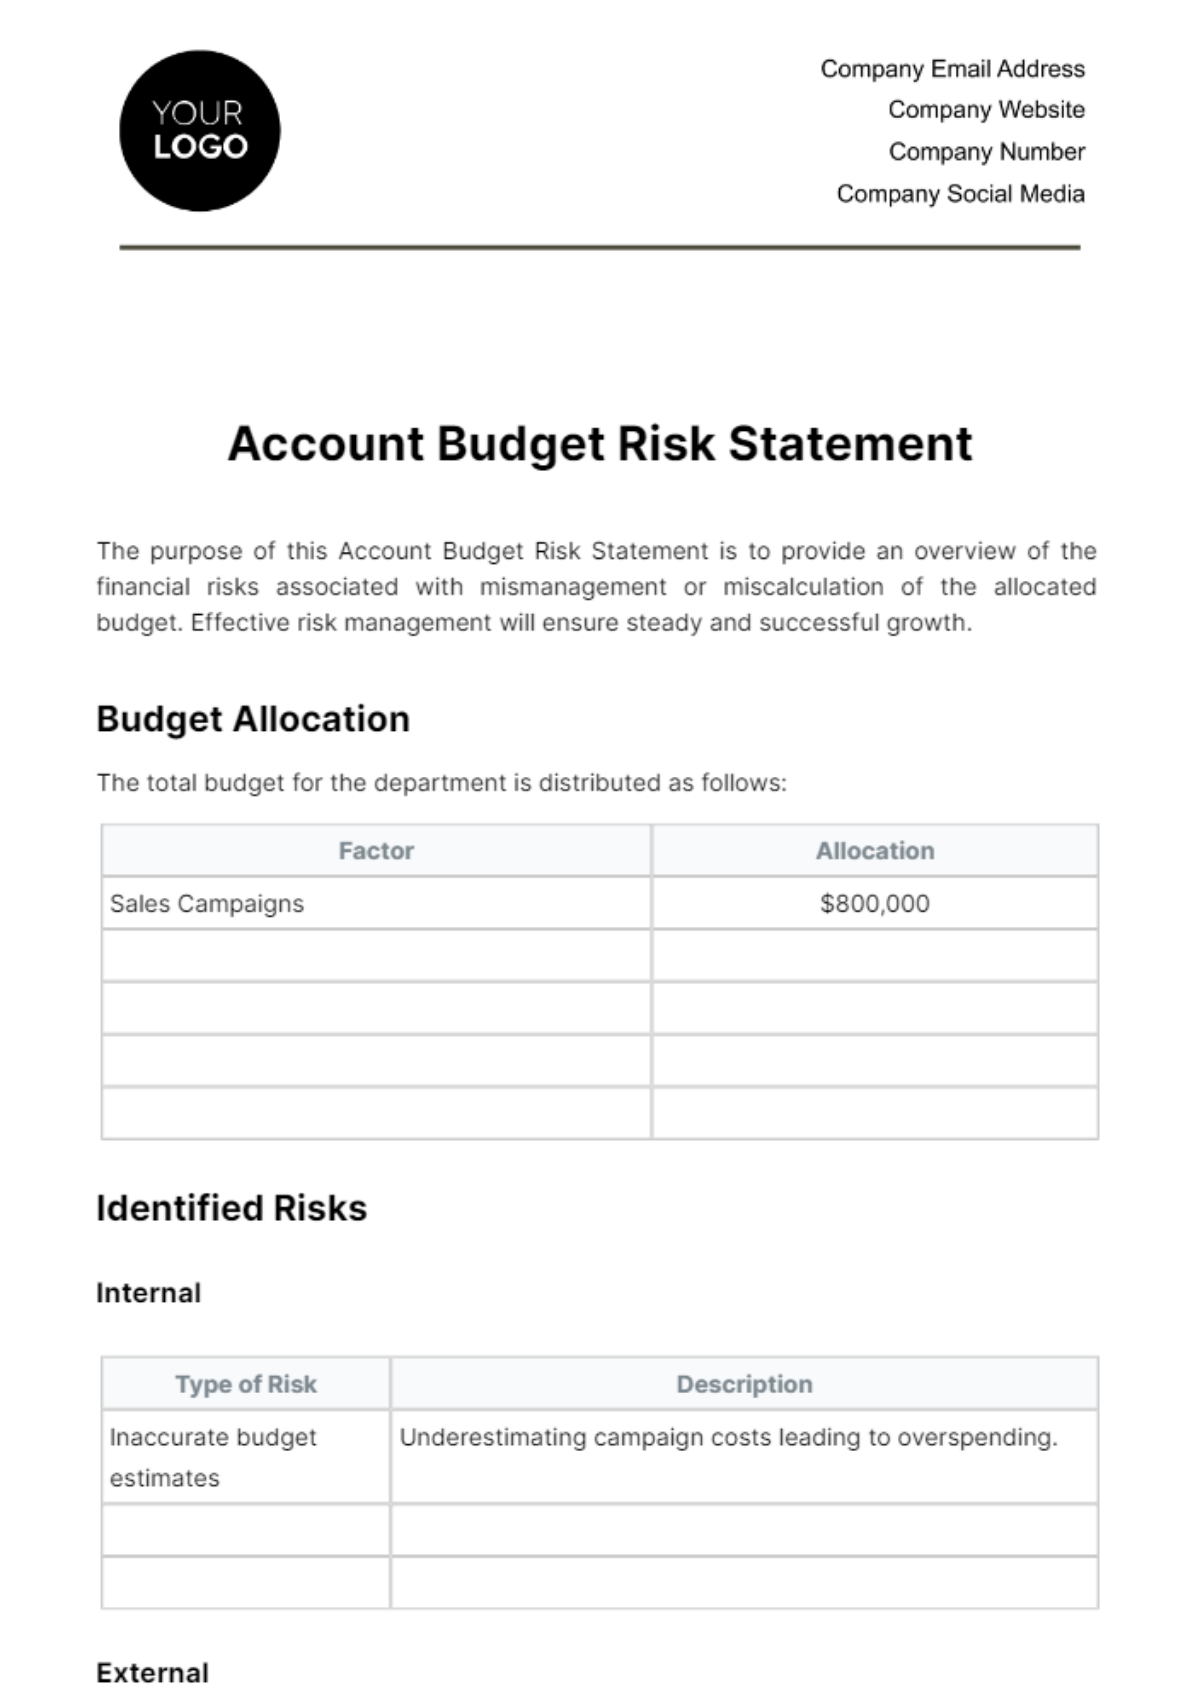 Free Account Budget Risk Statement Template